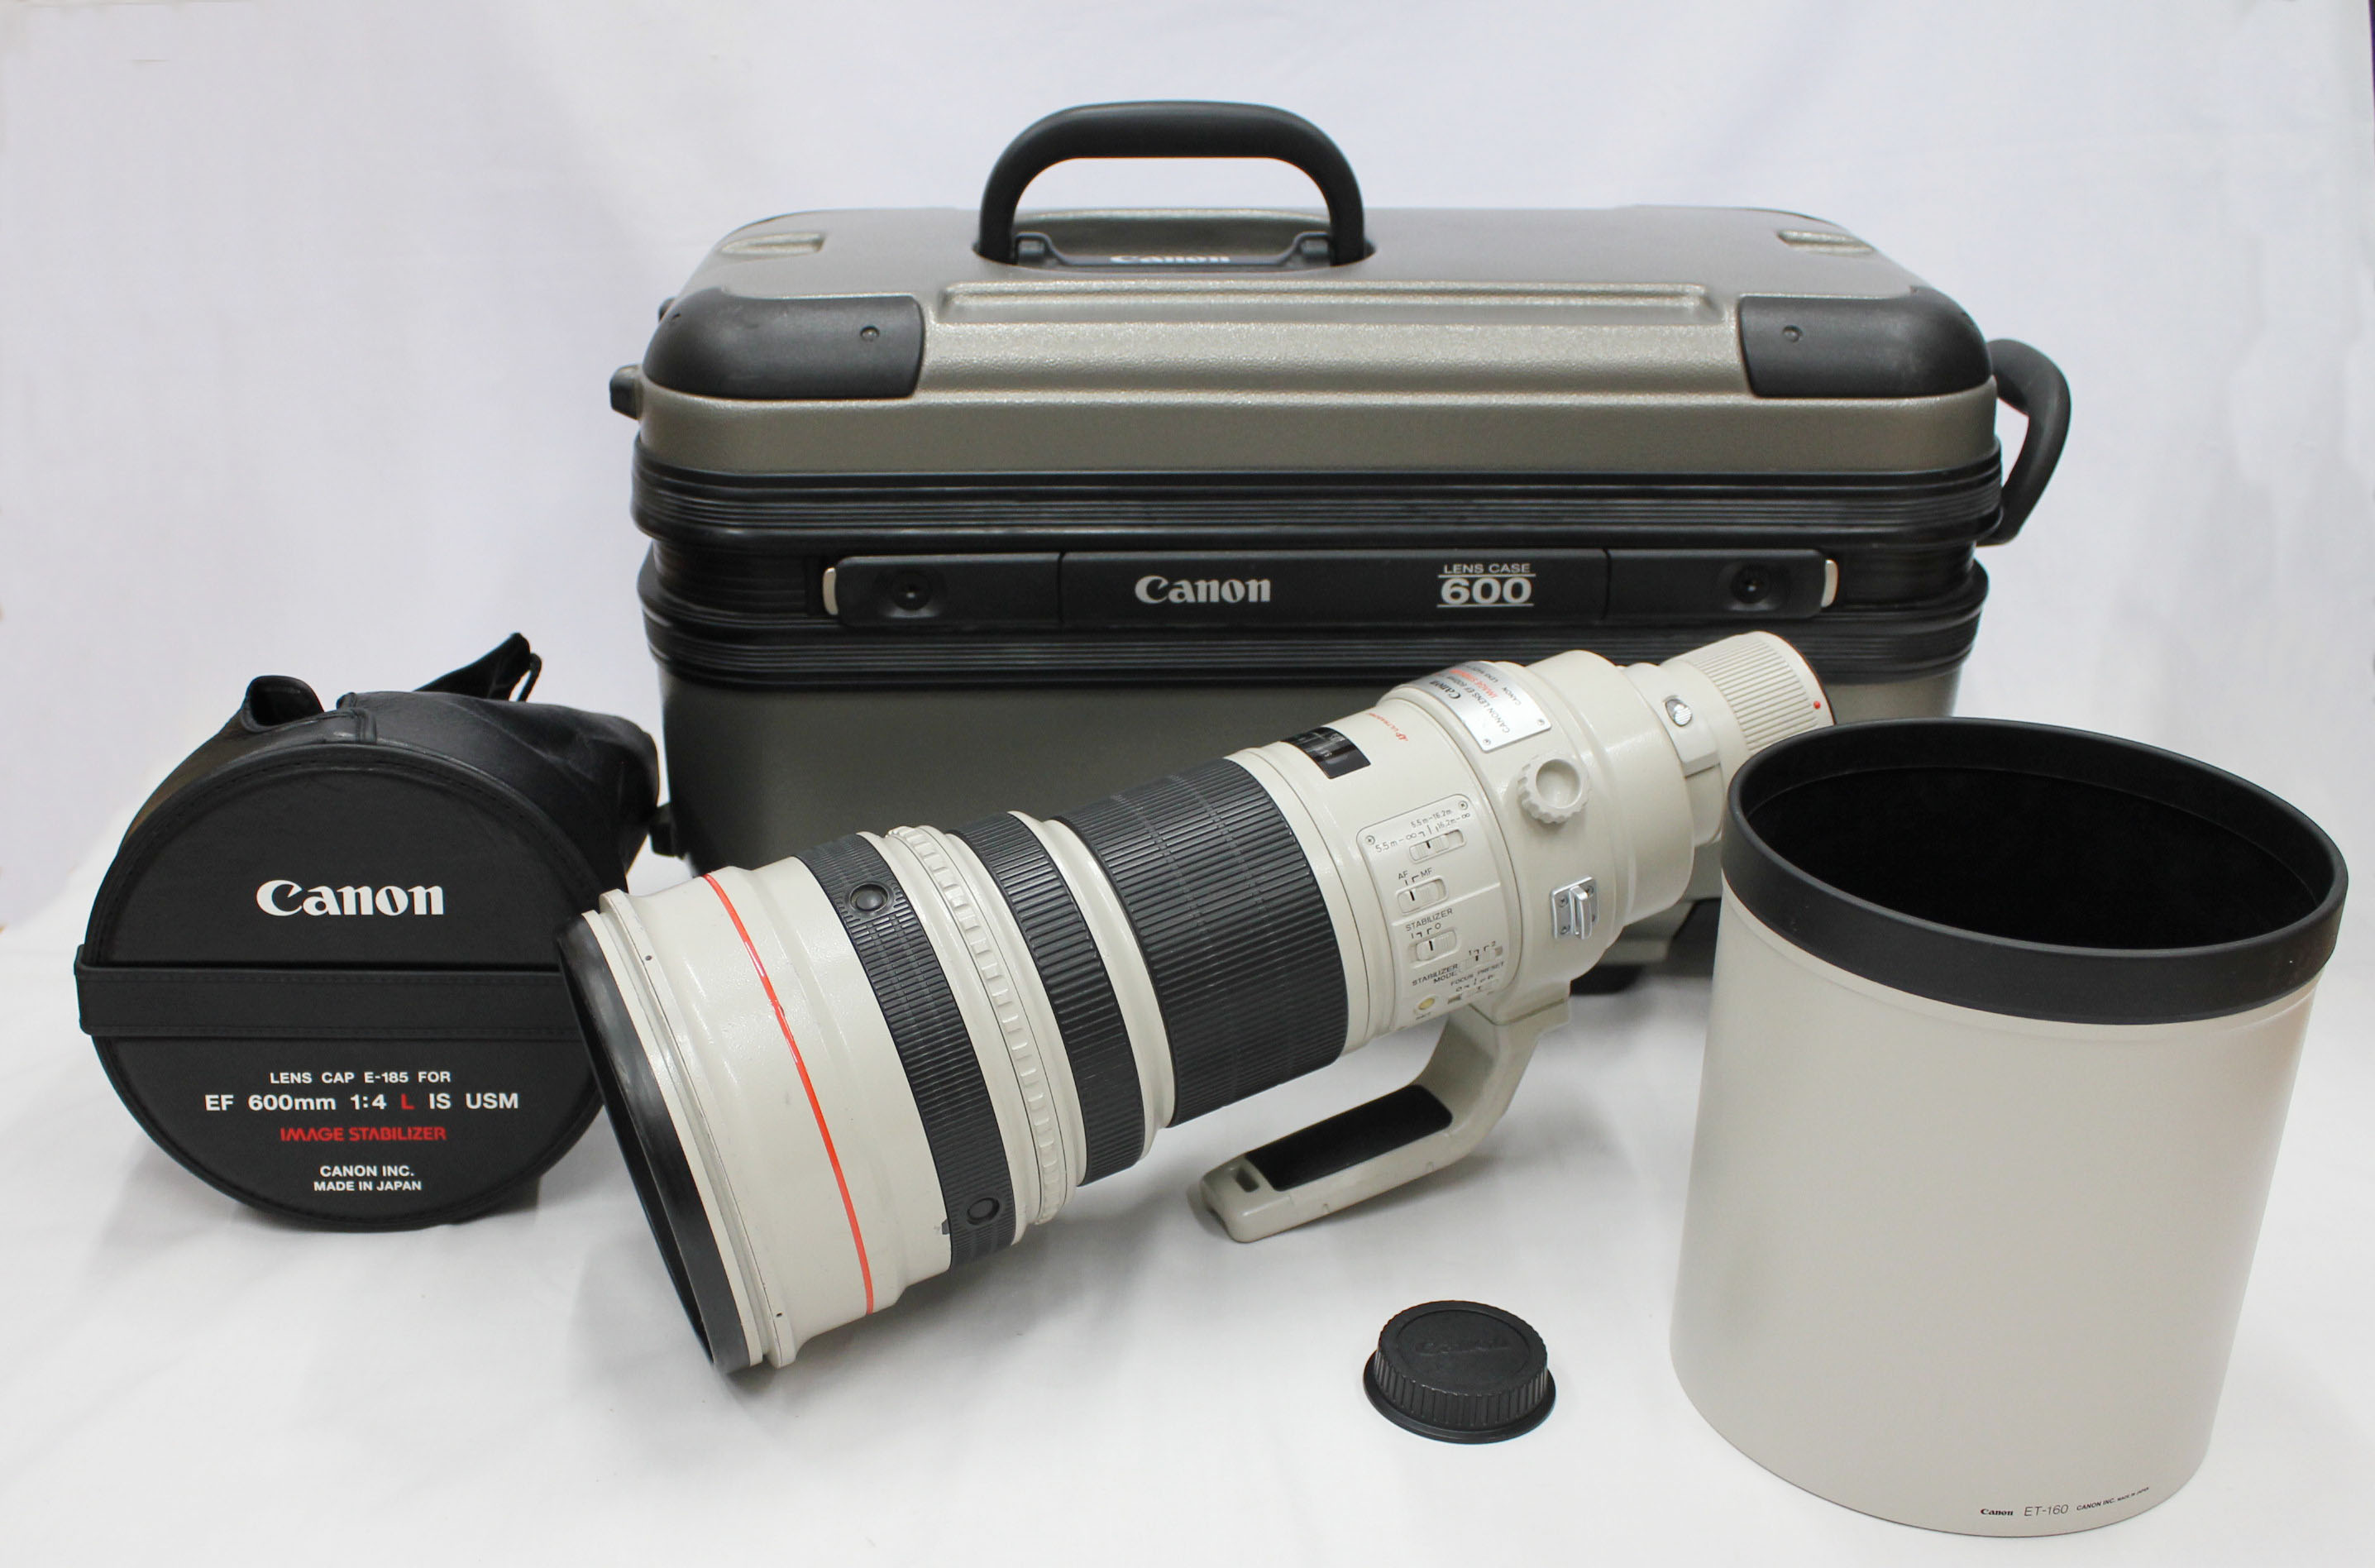 Japan Used Camera Shop | Canon EF 600mm F4 L IS USM Super Telephoto Lens with Hood & Case from Japan